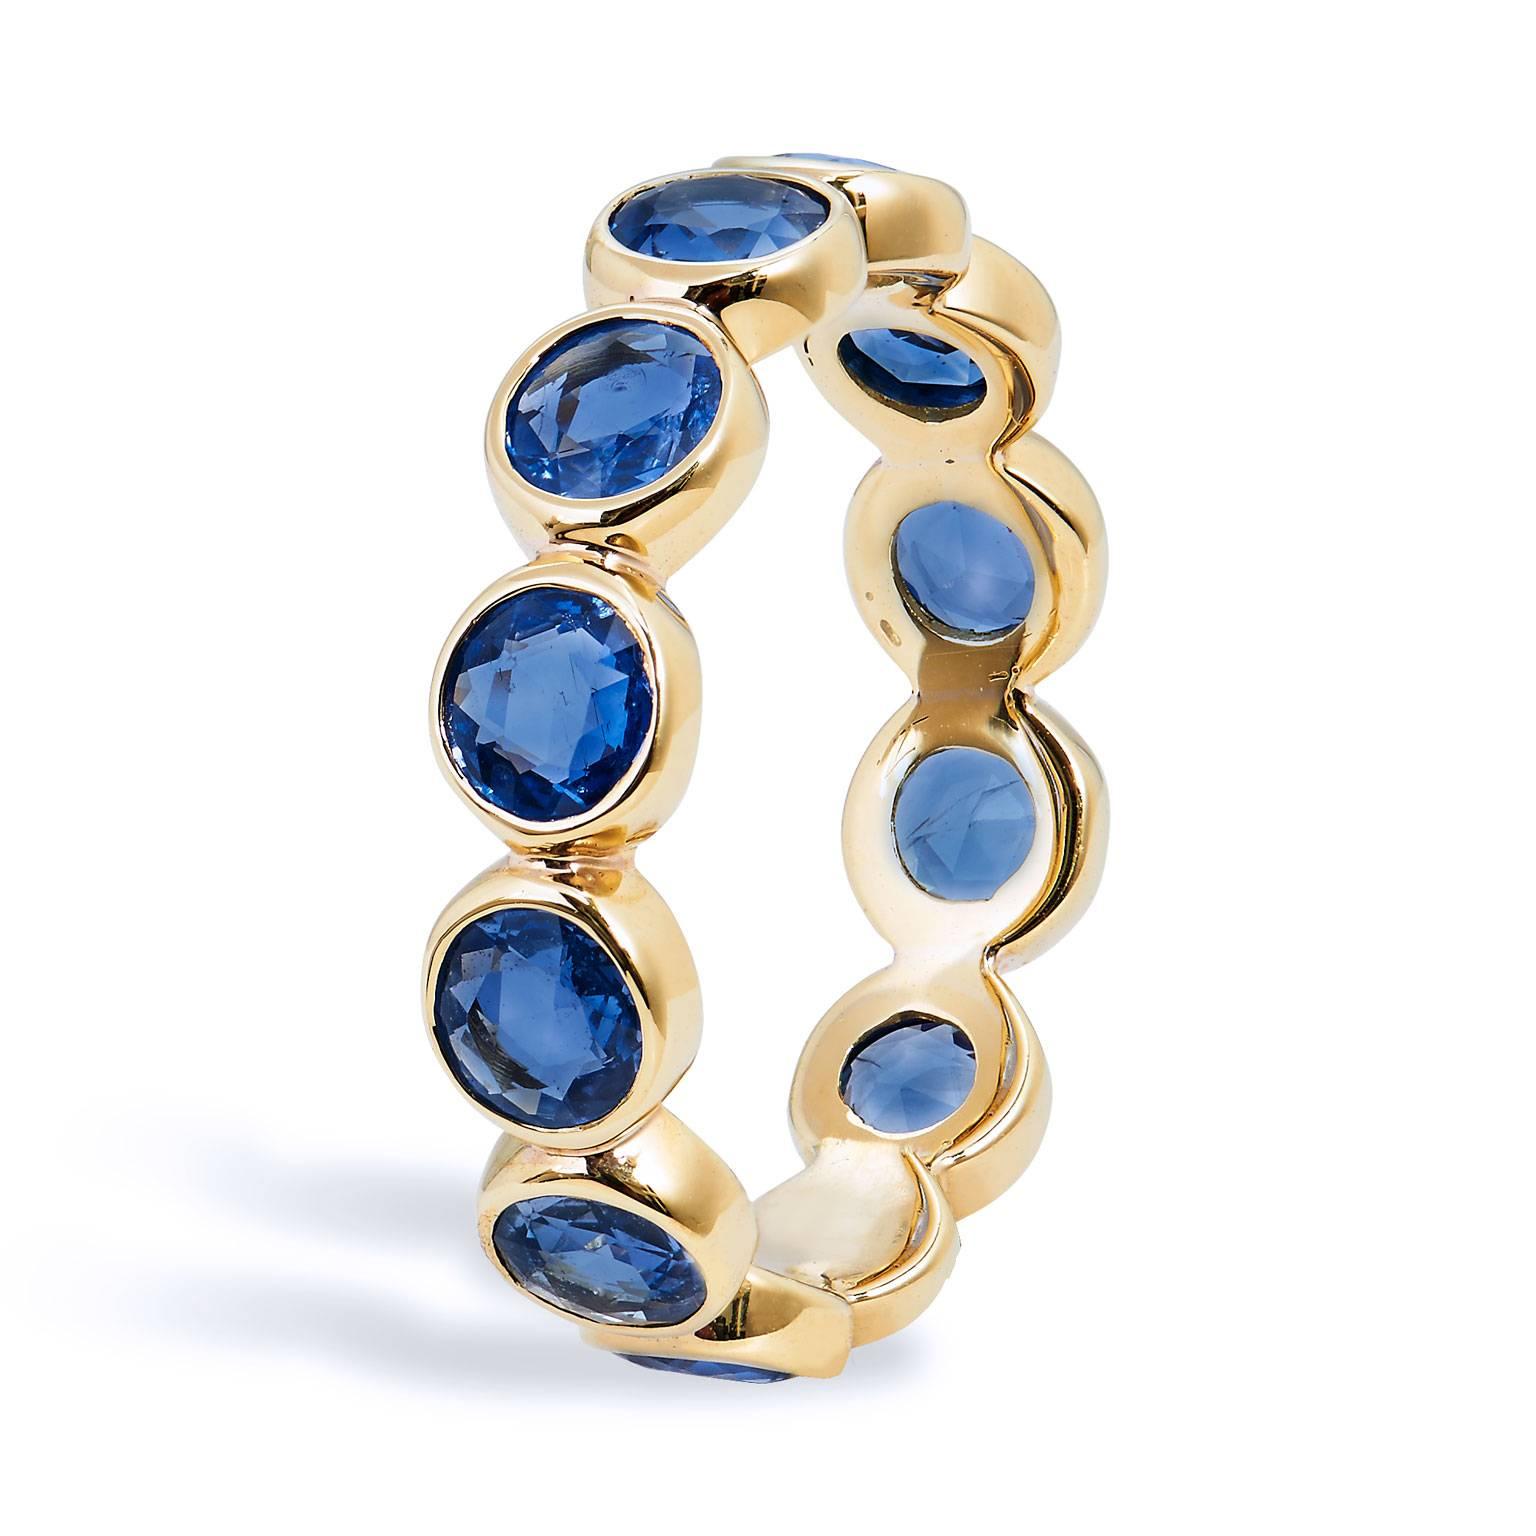 This handcrafted 18 karat yellow gold eternity band ring features twelve bezel set St. Clair Rose cut blue sapphires placed together to produce an approximate 3.00 carats of eye-catching color. This band ring stirs and illuminates the essence of her